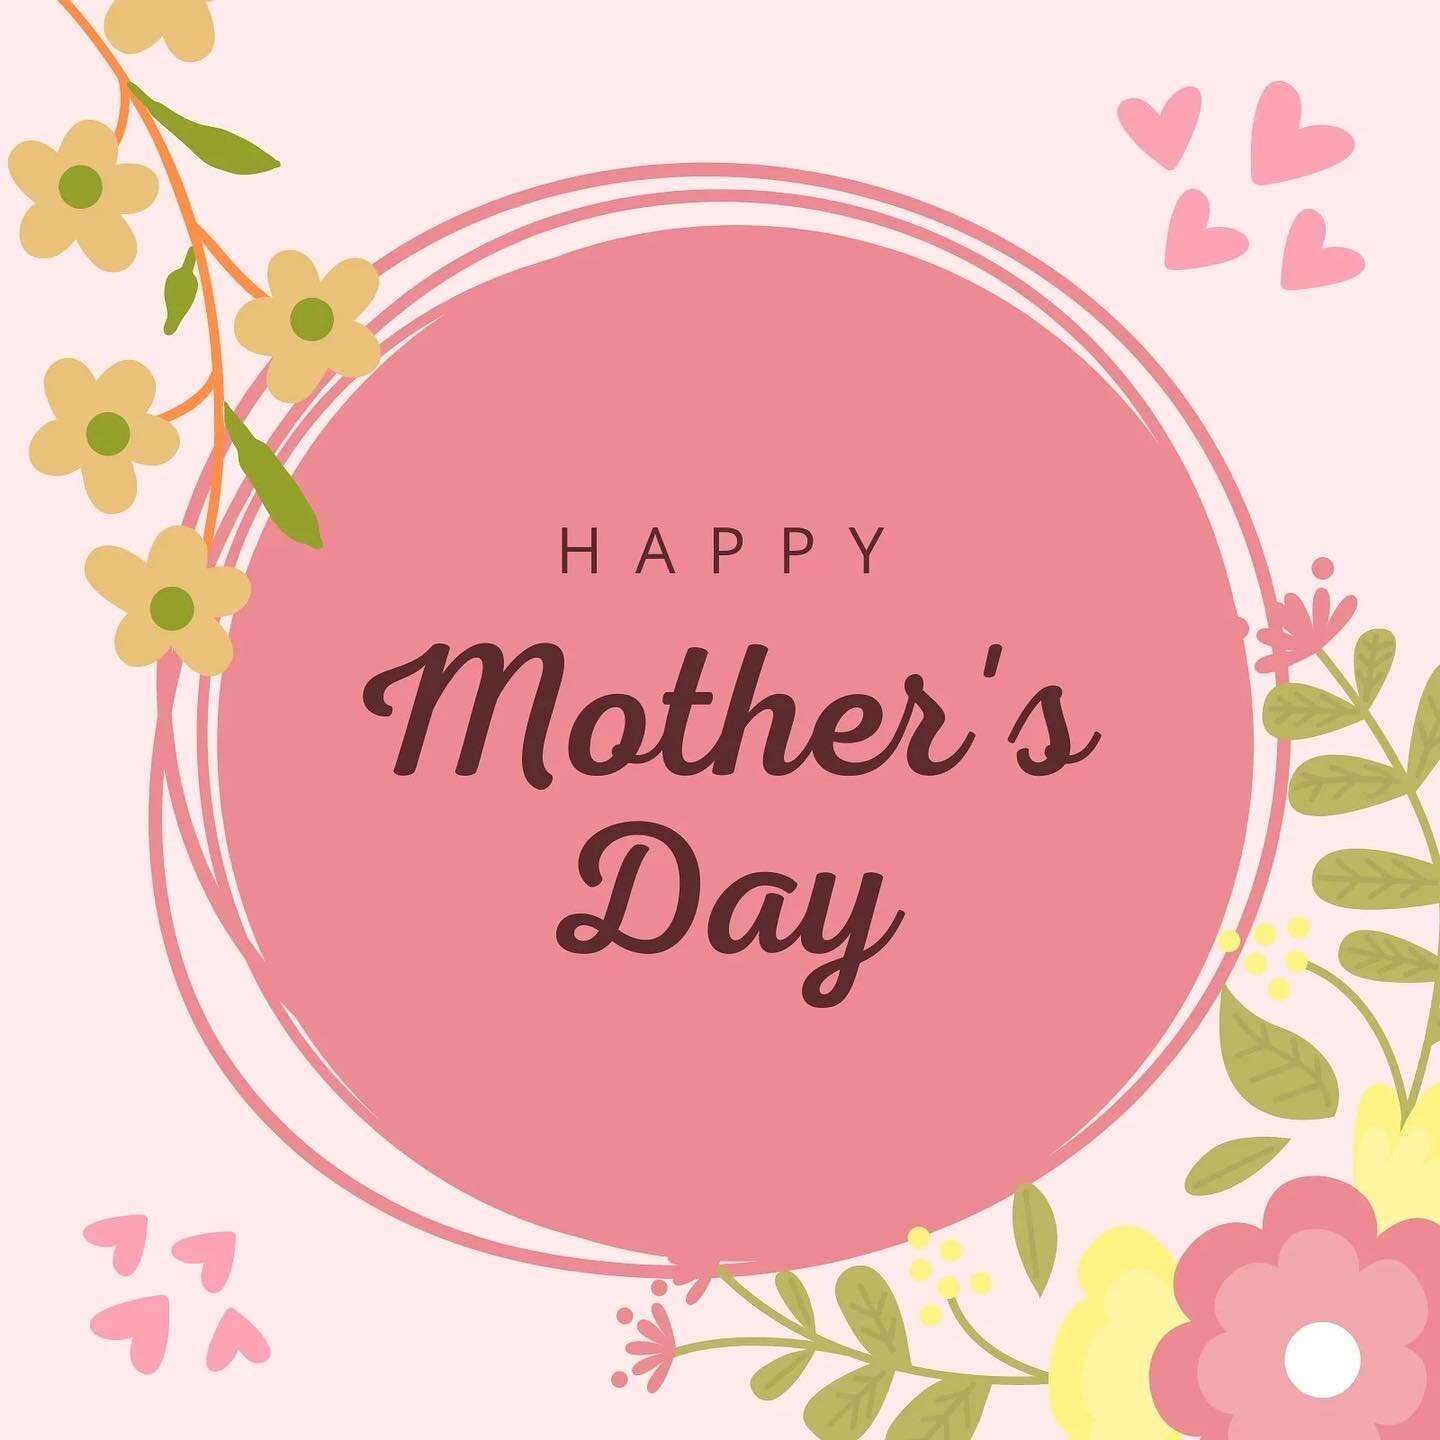 Happy Mother&rsquo;s Day to all the mothers, grand mothers, step mothers, foster mothers, mothers to be, mother figures, and dads playing both roles. We hope you all have an amazing day!